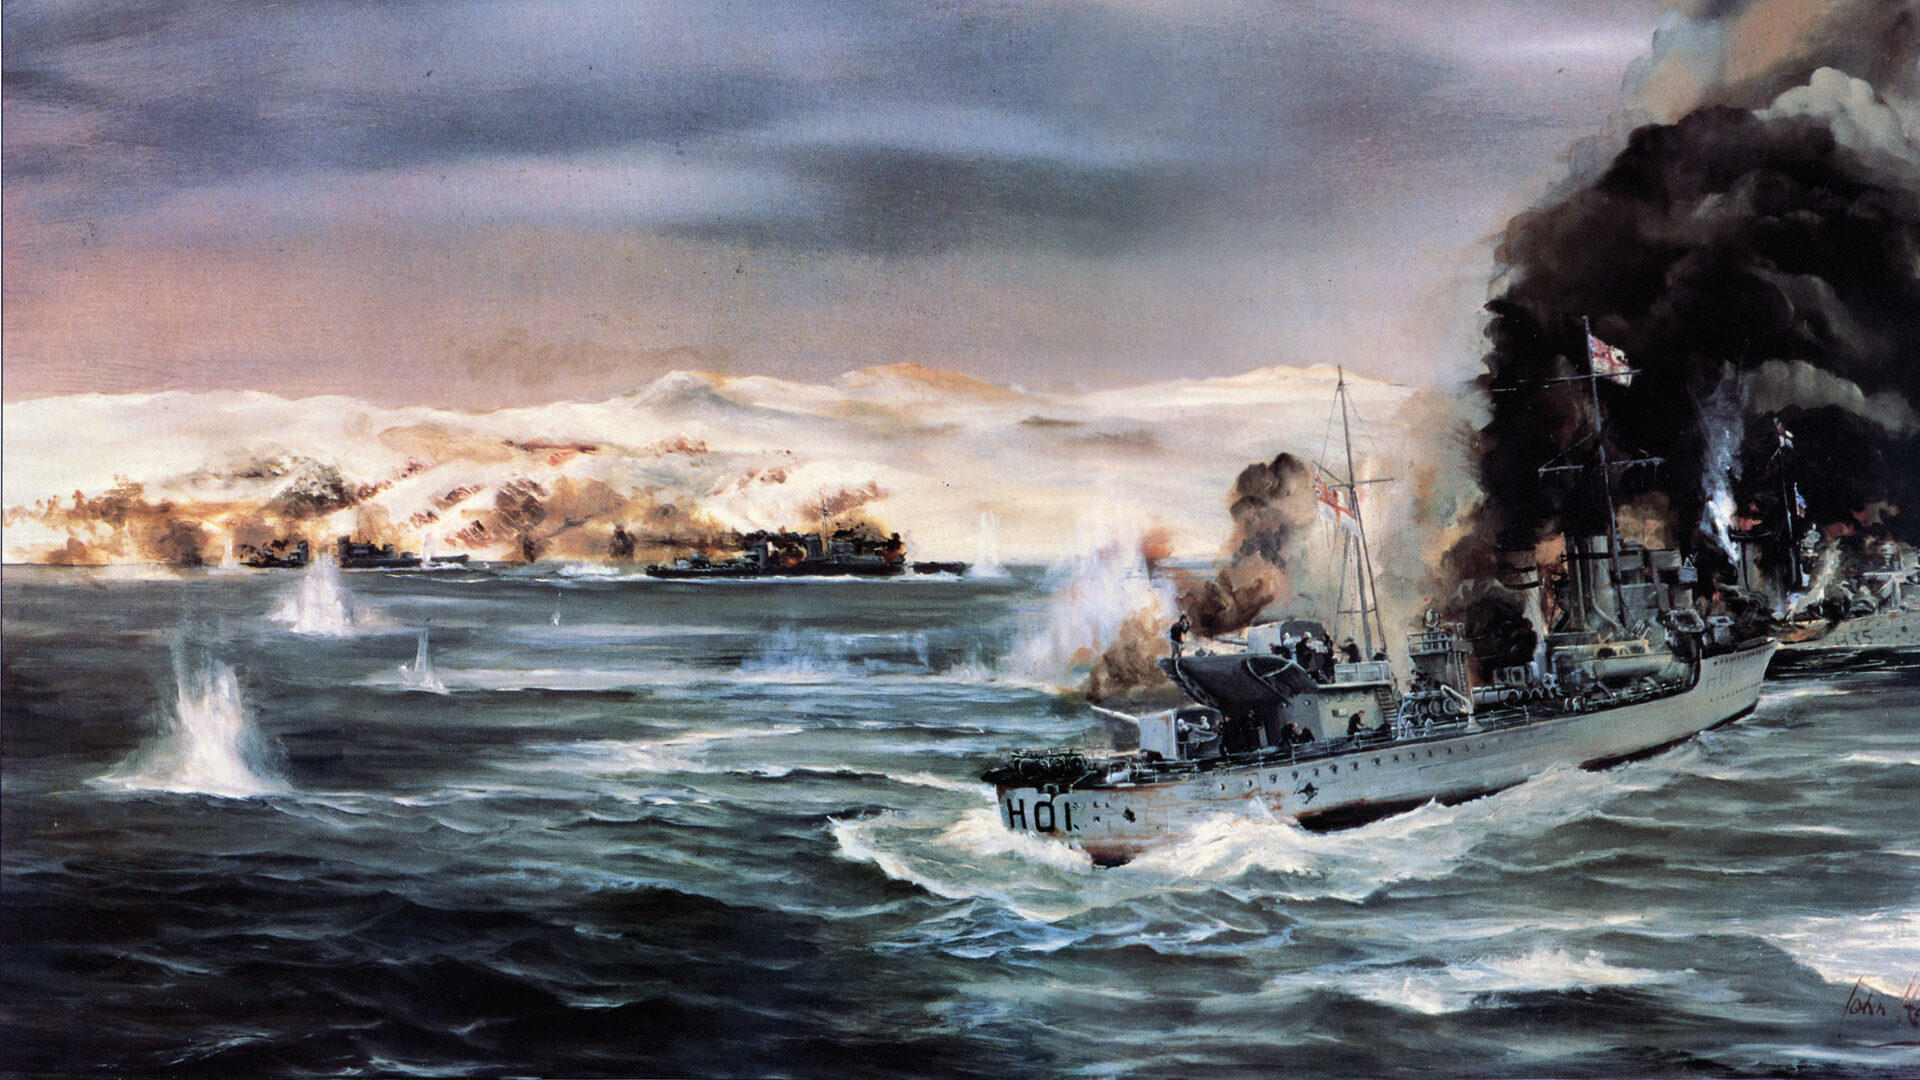 The damaged HMS Hotspur collides with the HMS Hunter on April 10, 1940, during the destroyer battle in the Narvik Fjord. Both the British and German naval commanders died in the heavy fighting at sea that day.